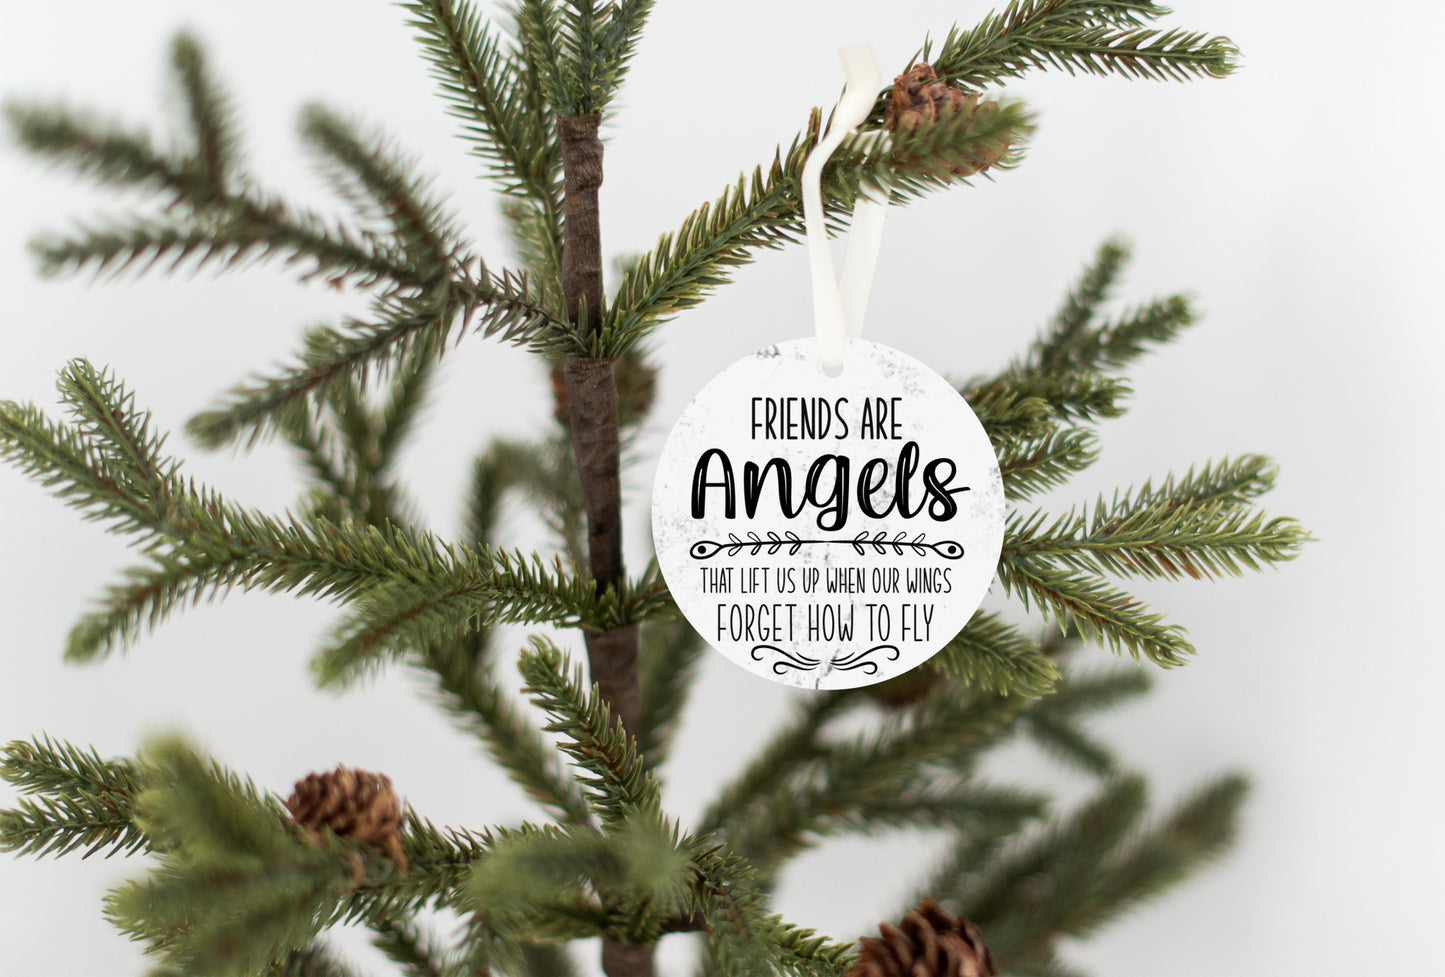 Friends are Angels -Christmas Ornament